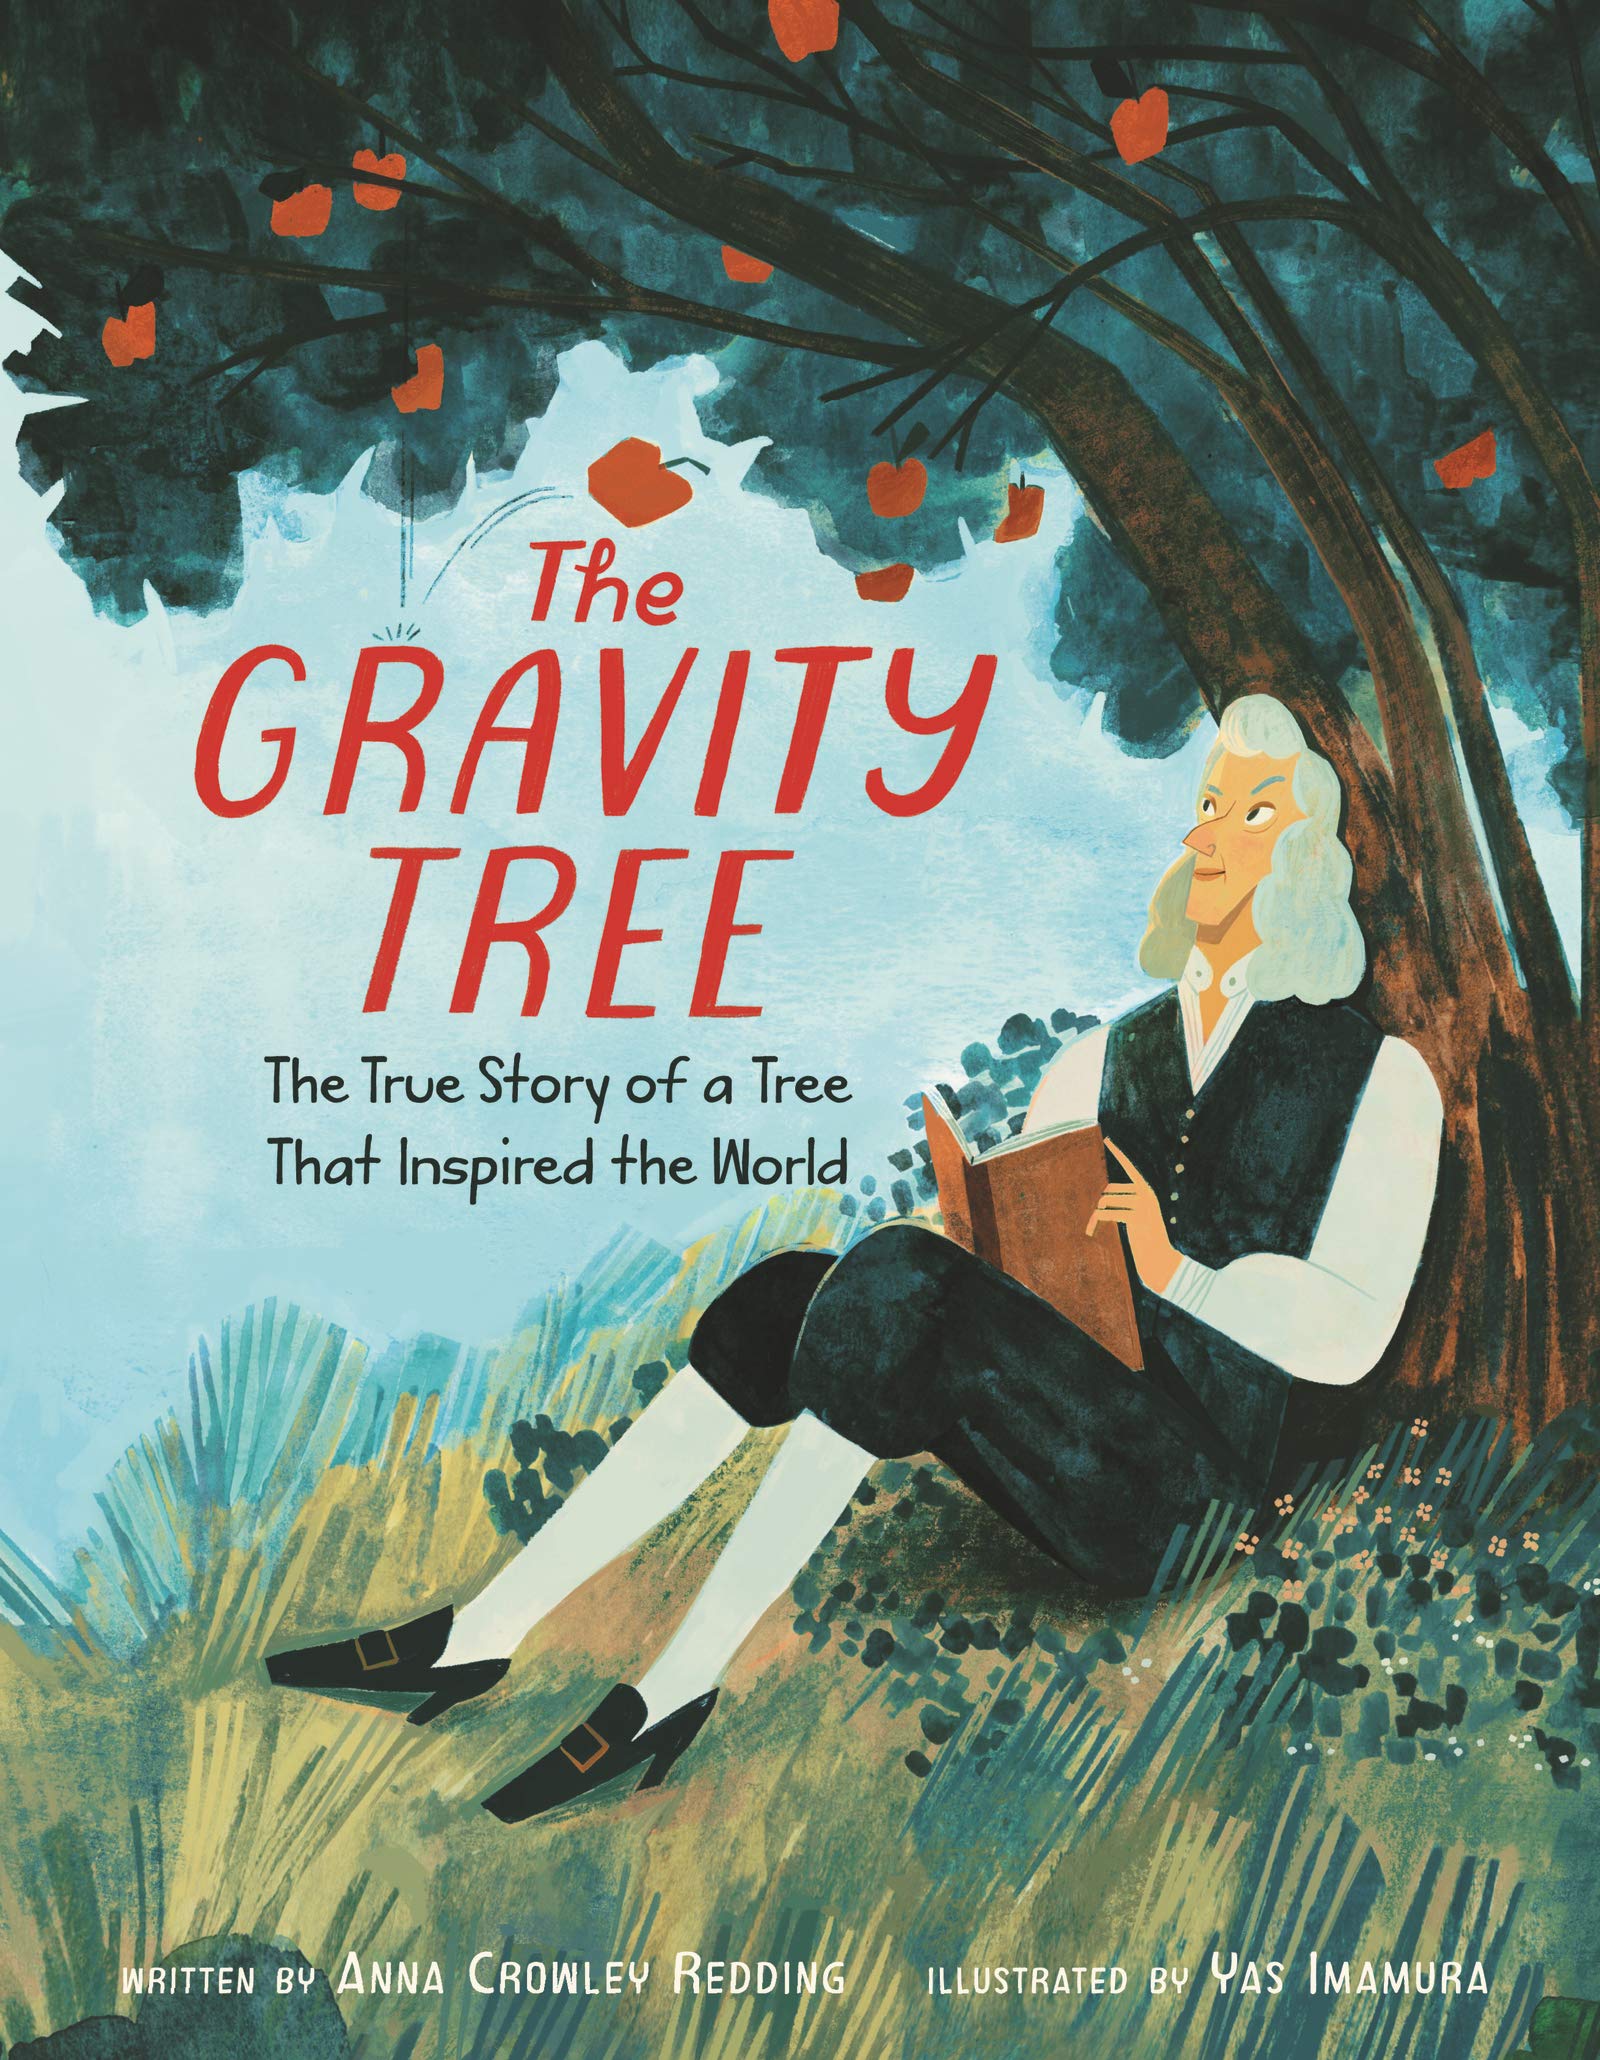 The Gravity Tree: The True Story of a Tree that Inspired the World